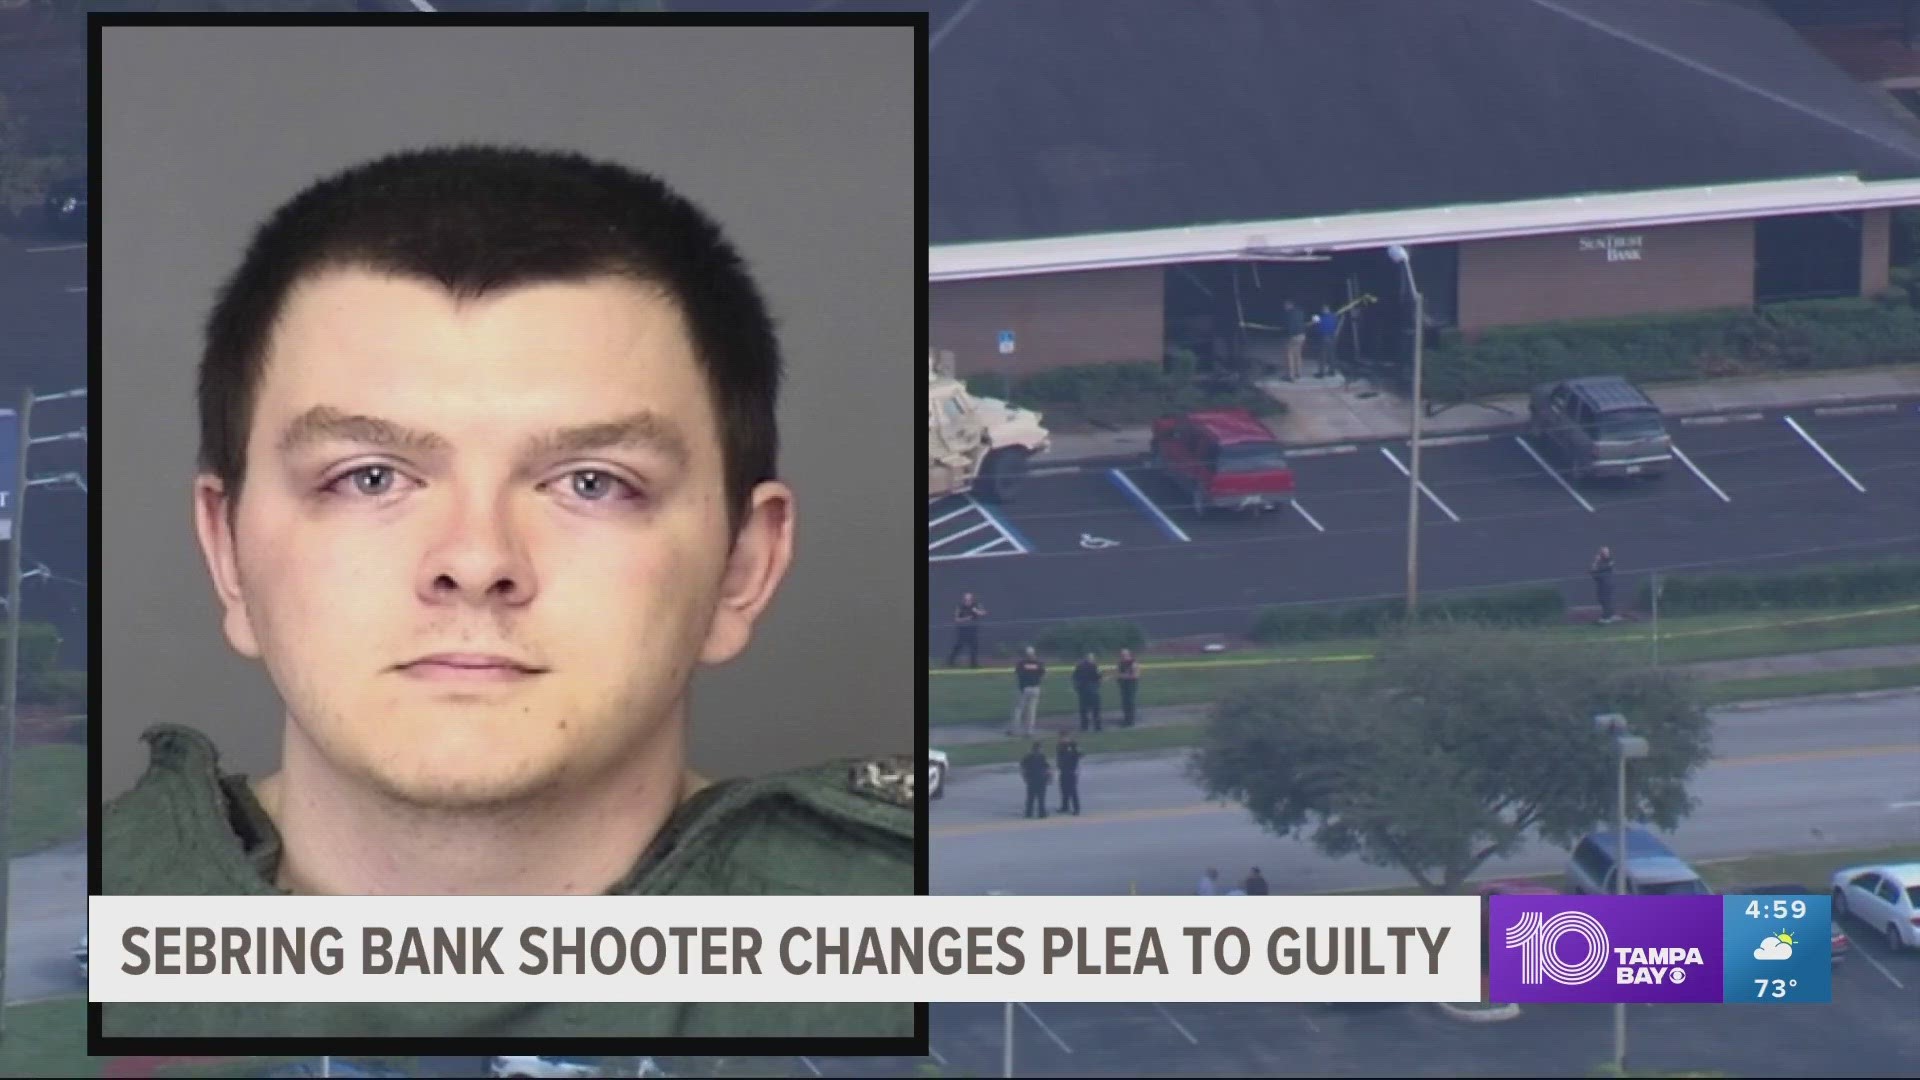 The now 25-year-old has been sitting behind bars since the shooting in 2019.